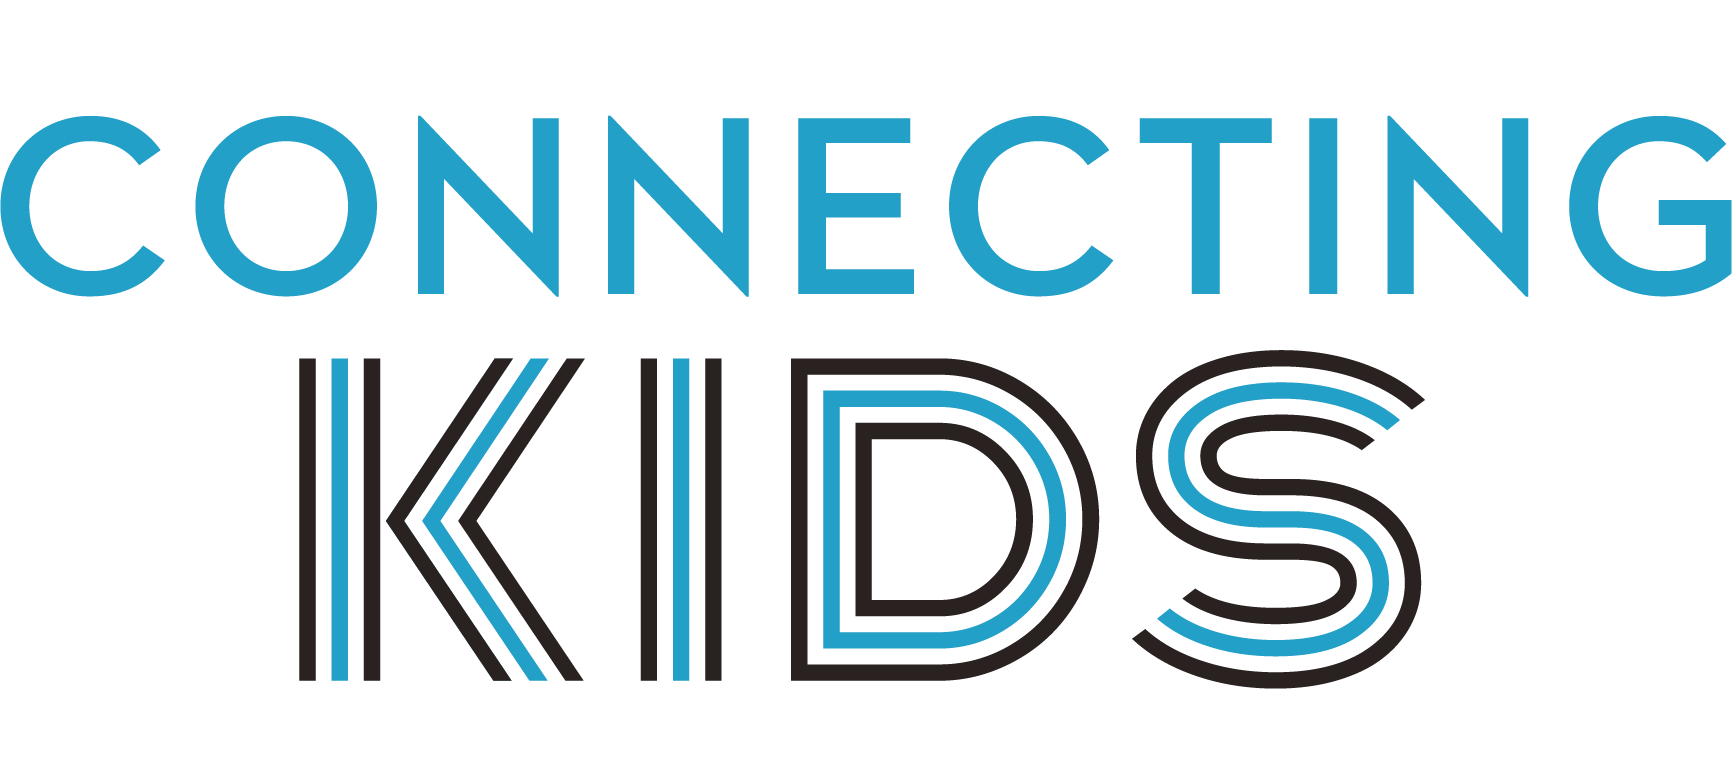 Chandler Center for the Arts Connecting Kids Logo